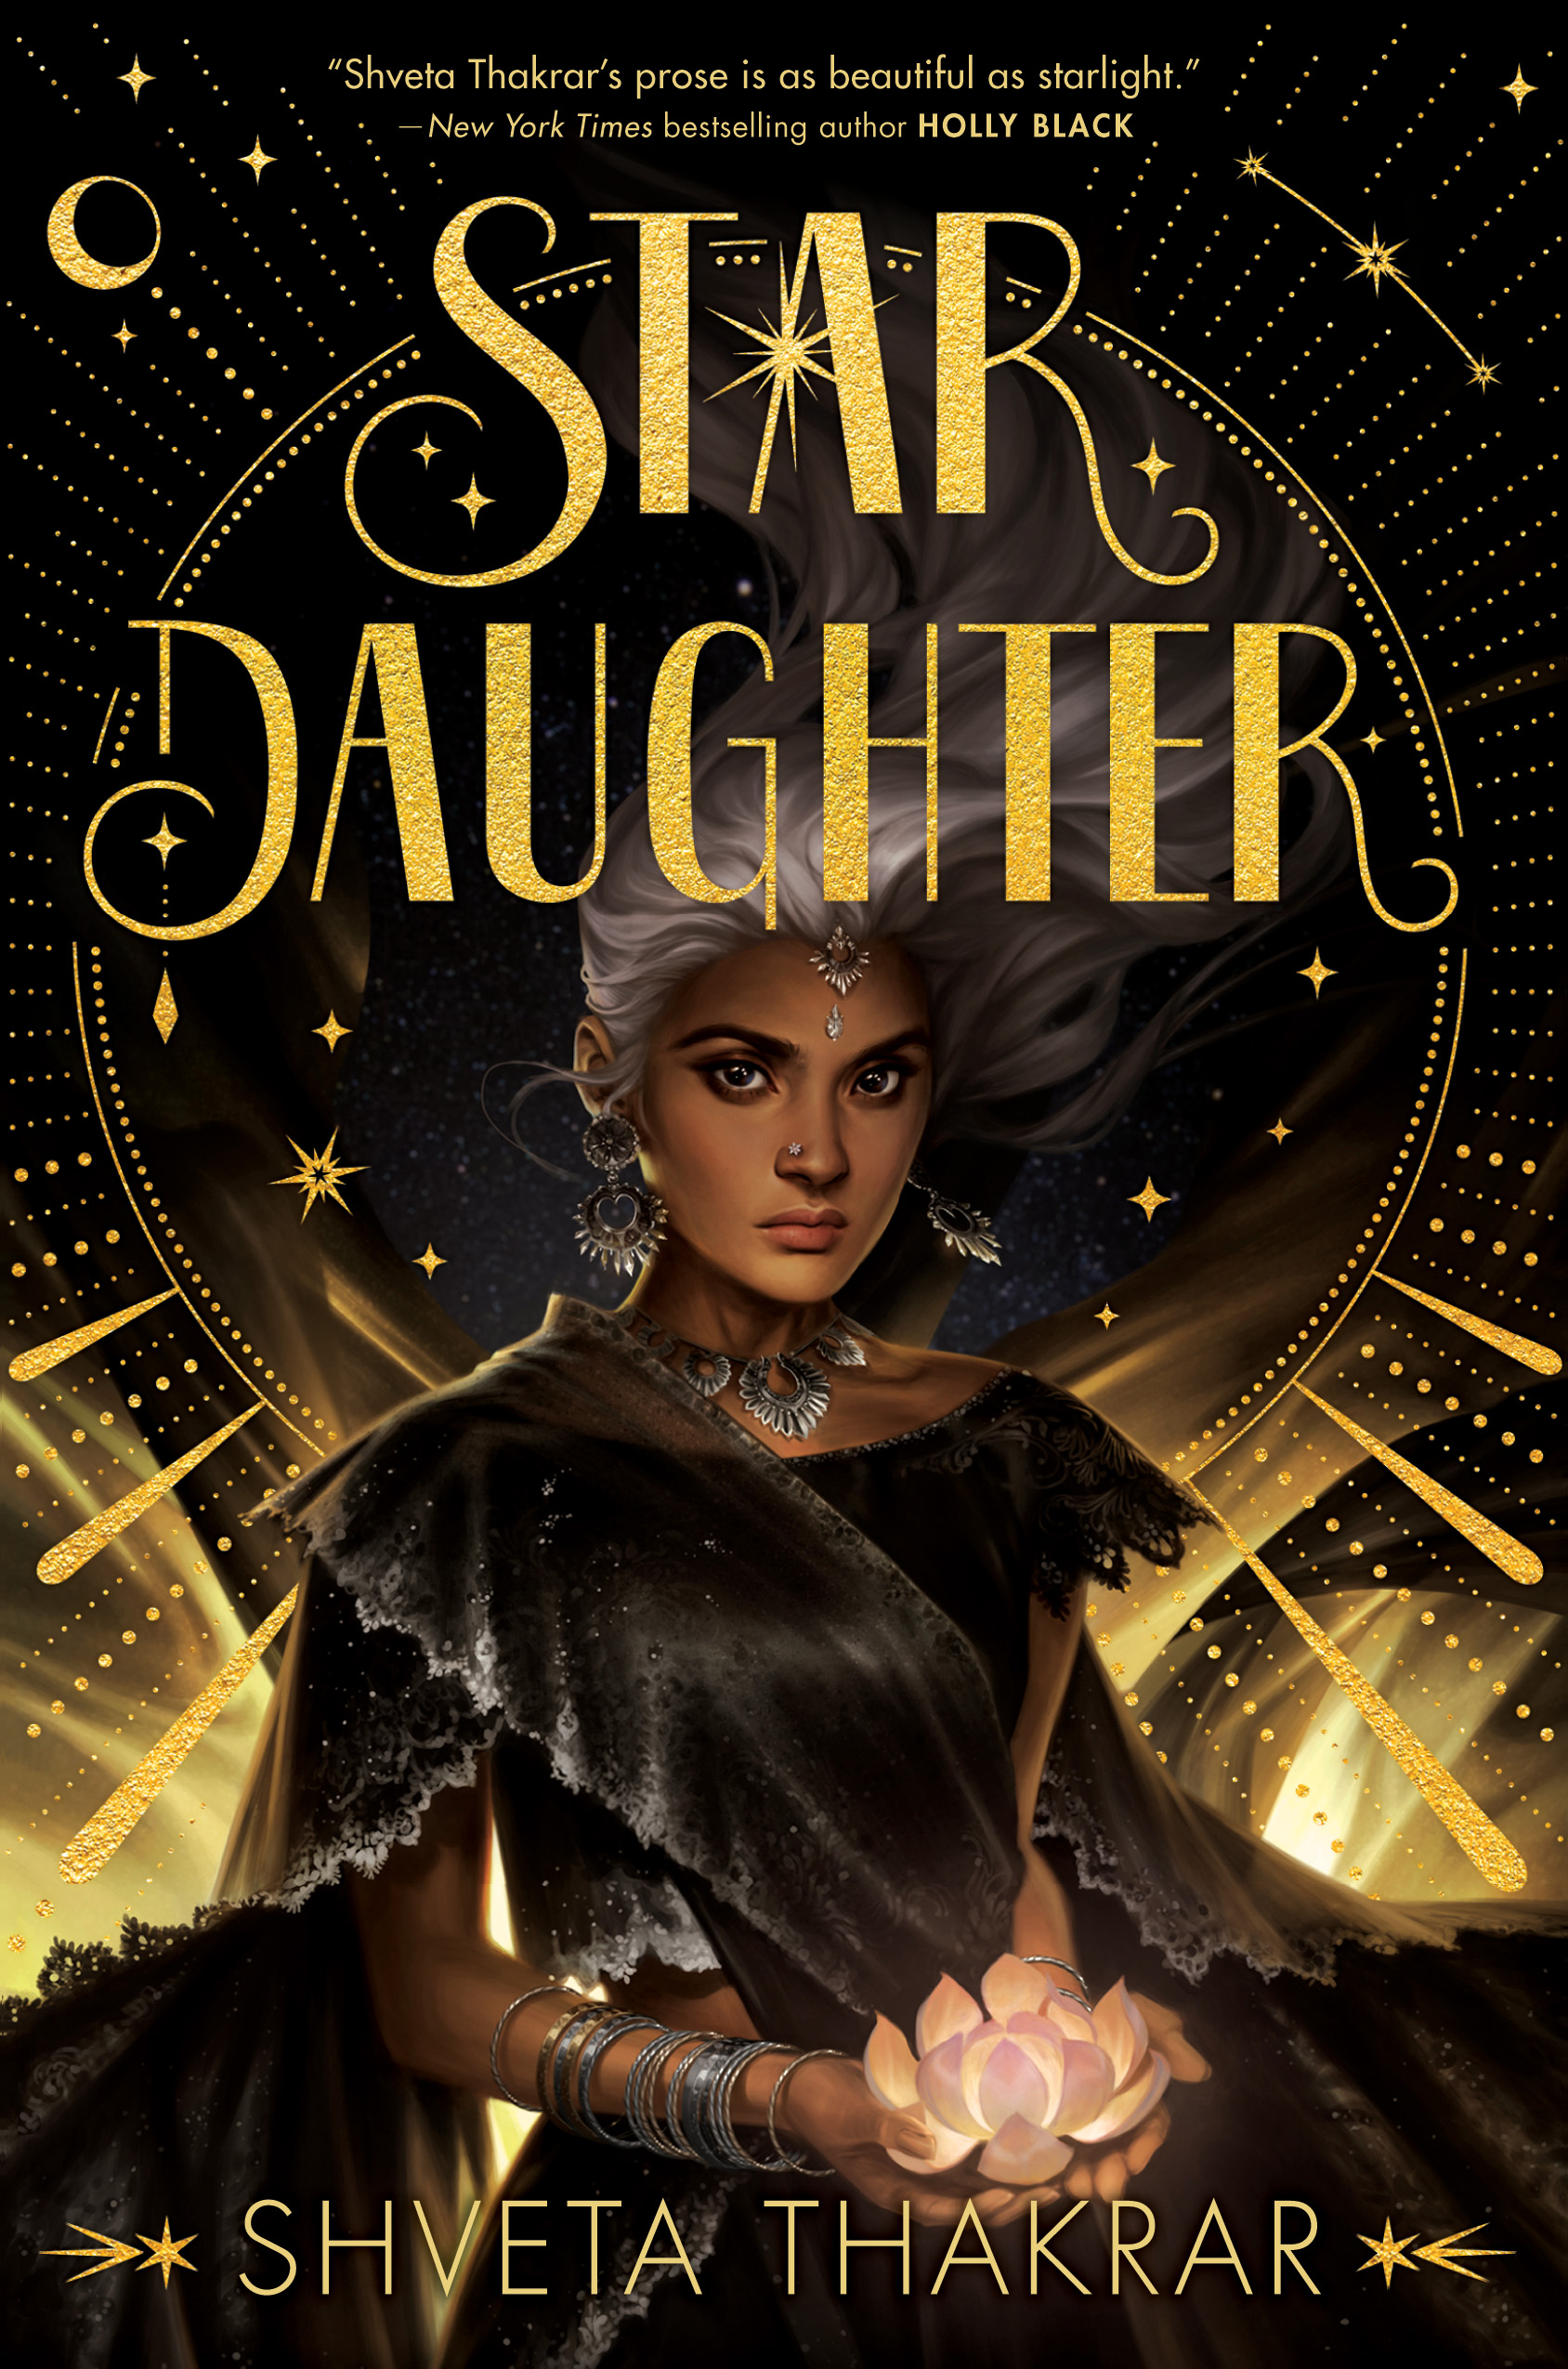 Book cover featuring the title Star Daughter in large gold letters at the top with an illustration of a brown-skinned young woman with sparkling silver hair wearing a black sari and holding a glowing lotus against a celestial backgorund.